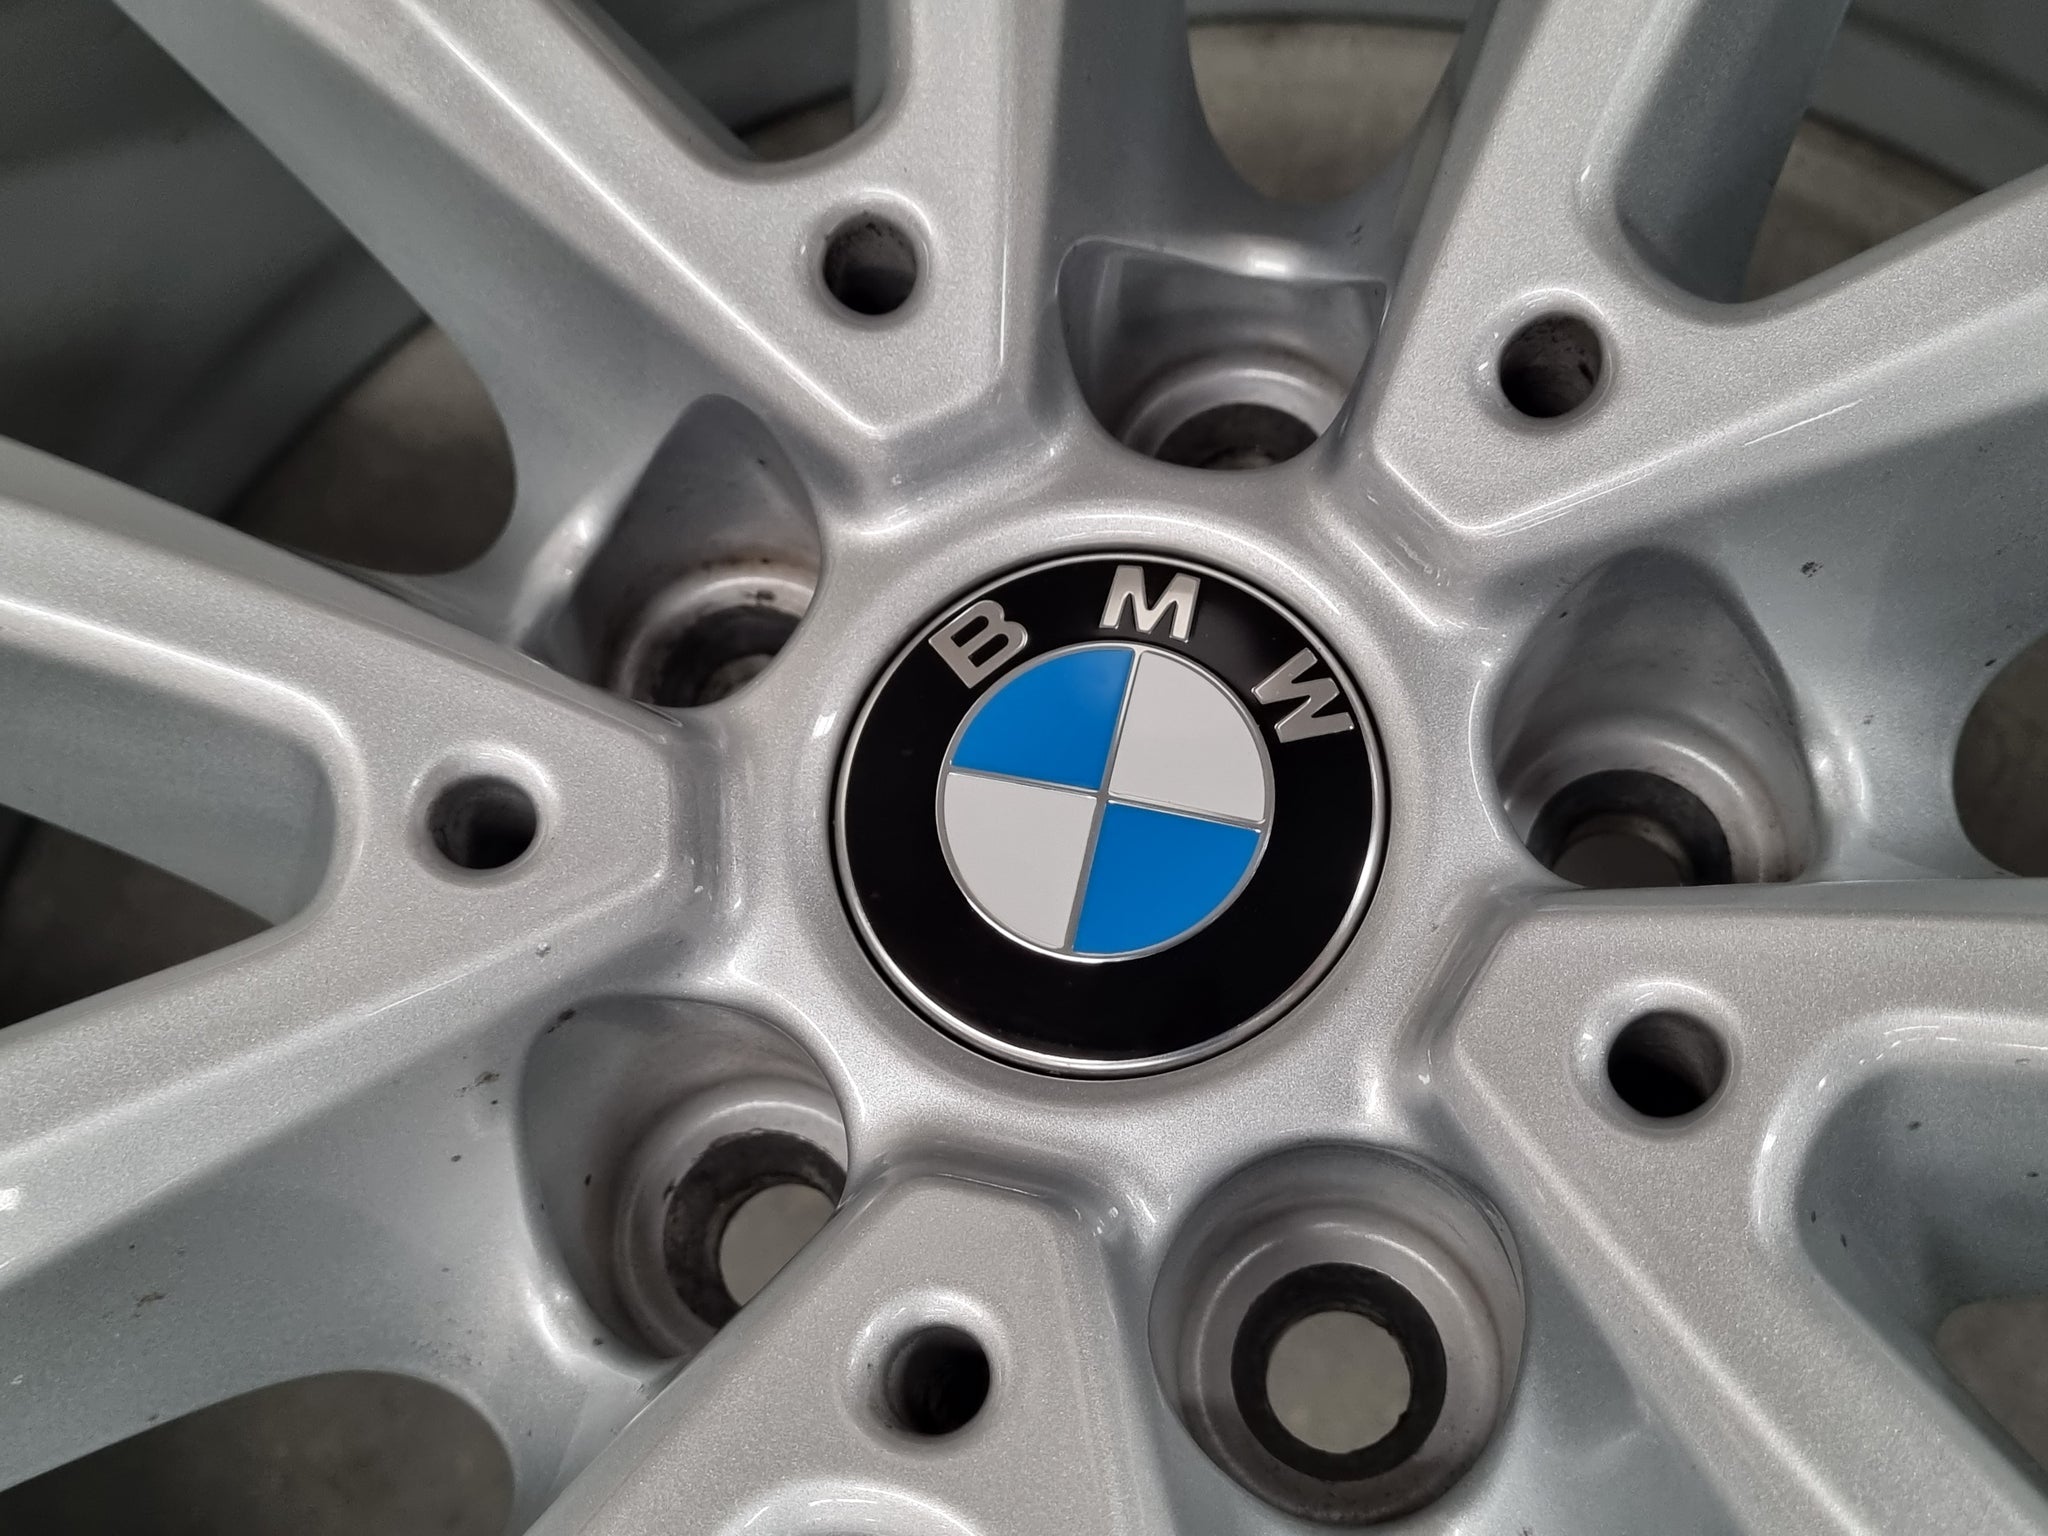 Load image into Gallery viewer, Genuine BMW X7 G07 Style 750 20 Inch Silver Alloy Wheels Set of 4
